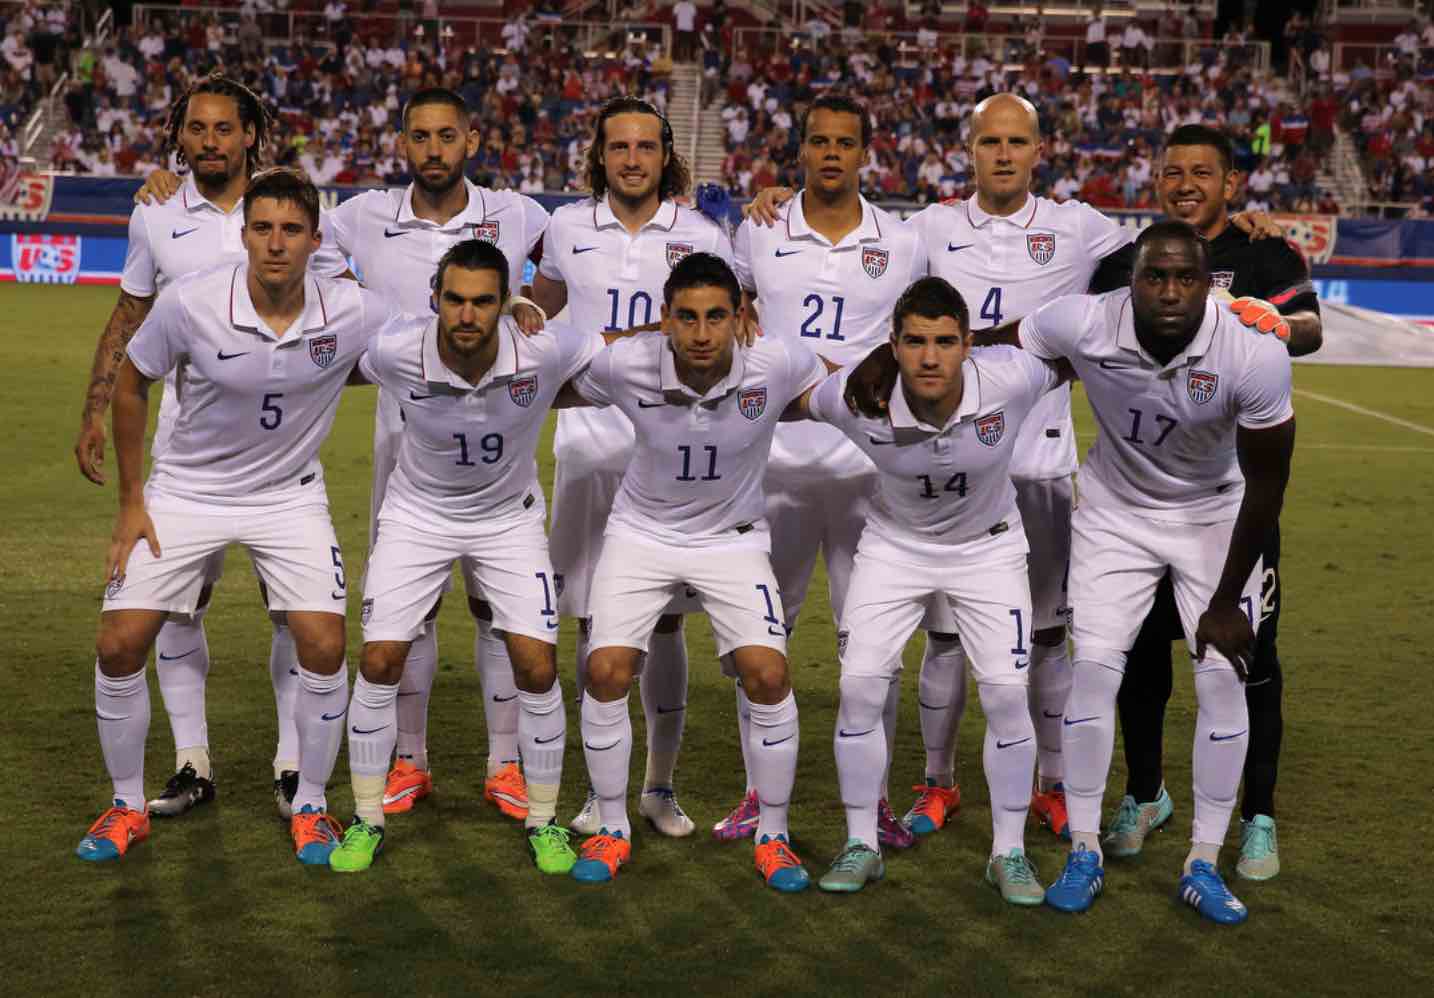 Last prep for the Gold Cup: USMNT vs. Guatemala